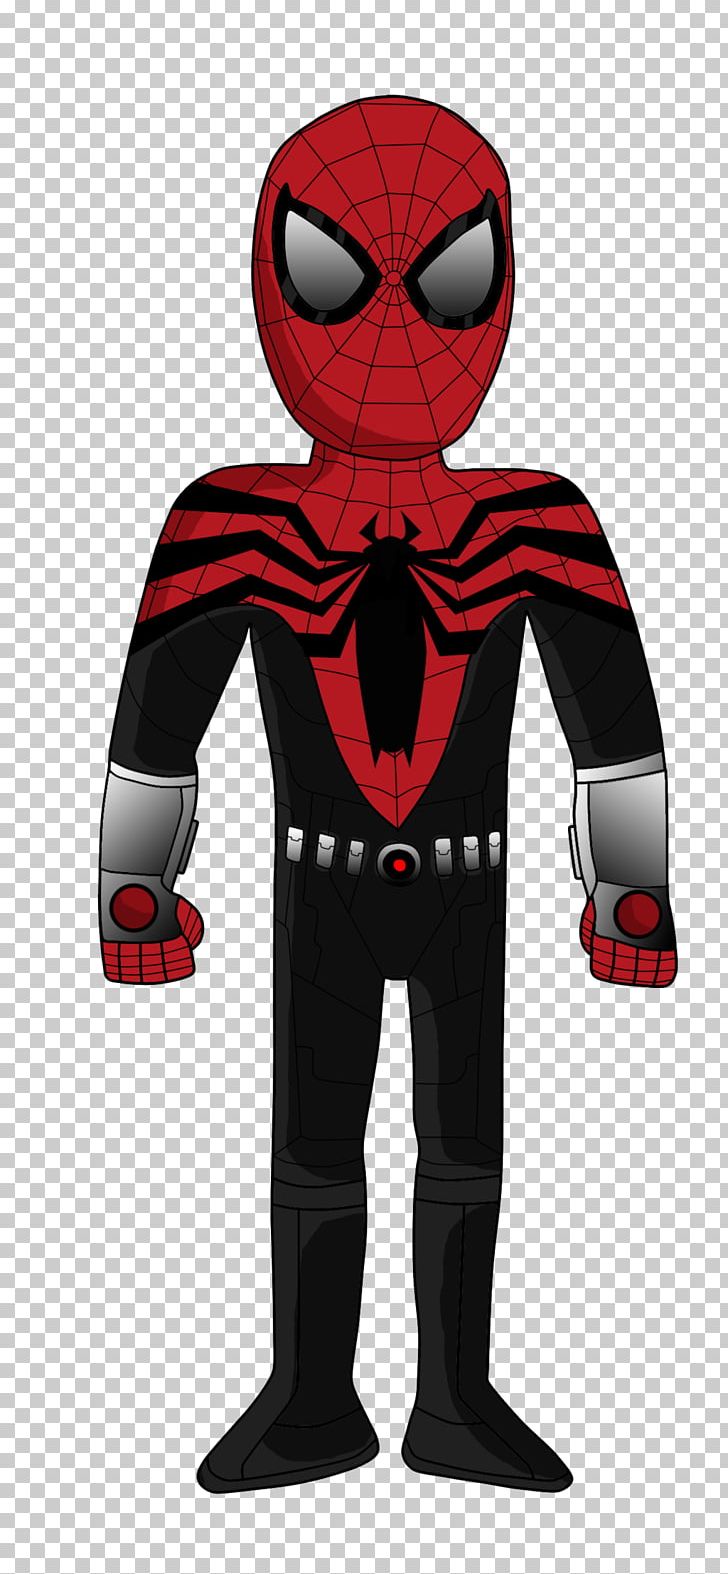 The Superior Spider-Man Costume Spider-Man: Homecoming Film Series Ultimate Spider-Man PNG, Clipart, Art, Character, Costume, Drawing, Fictional Character Free PNG Download